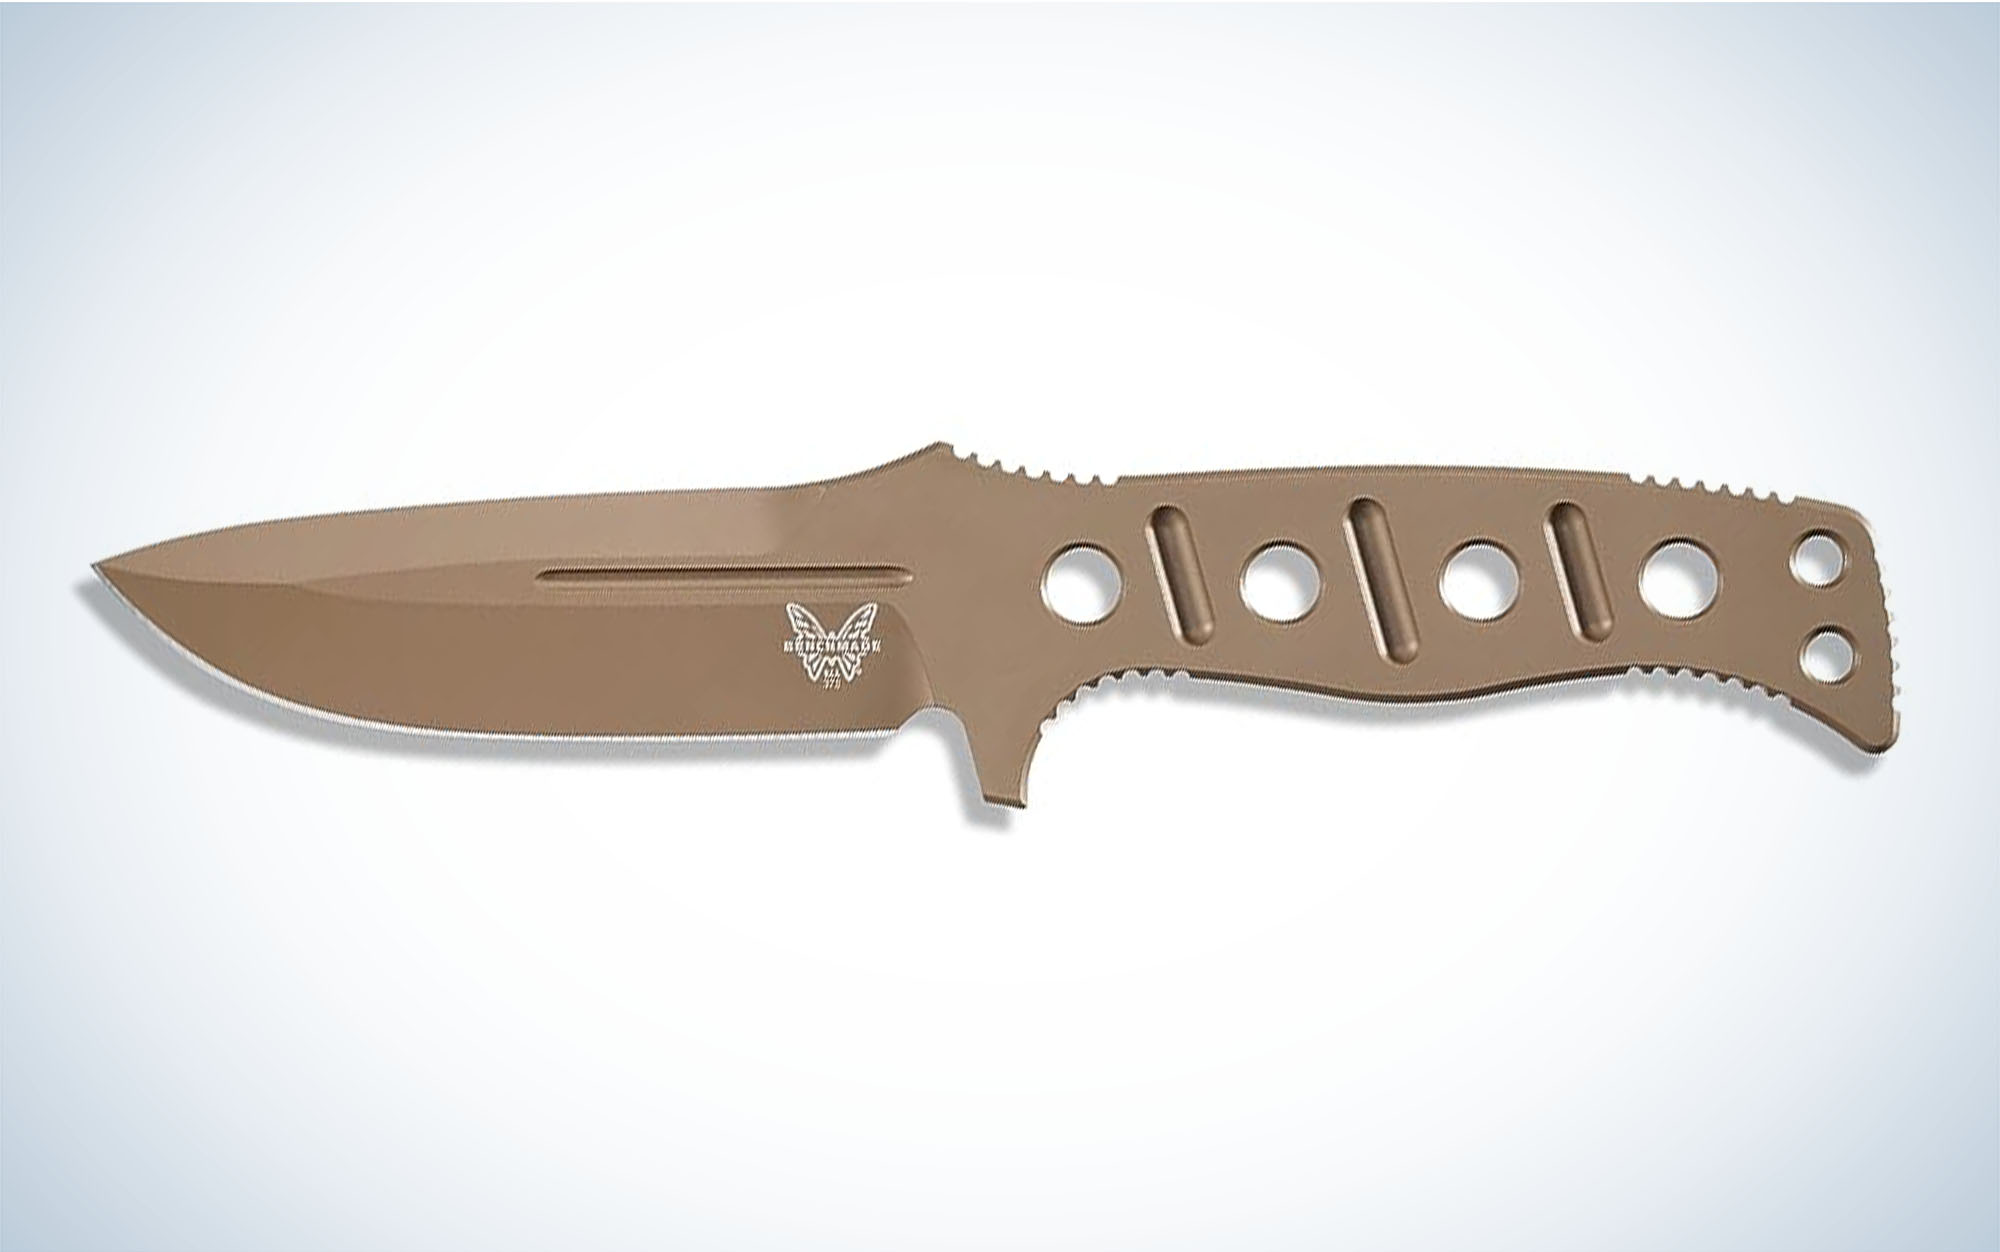 We tested the Benchmade Fixed Adamas.